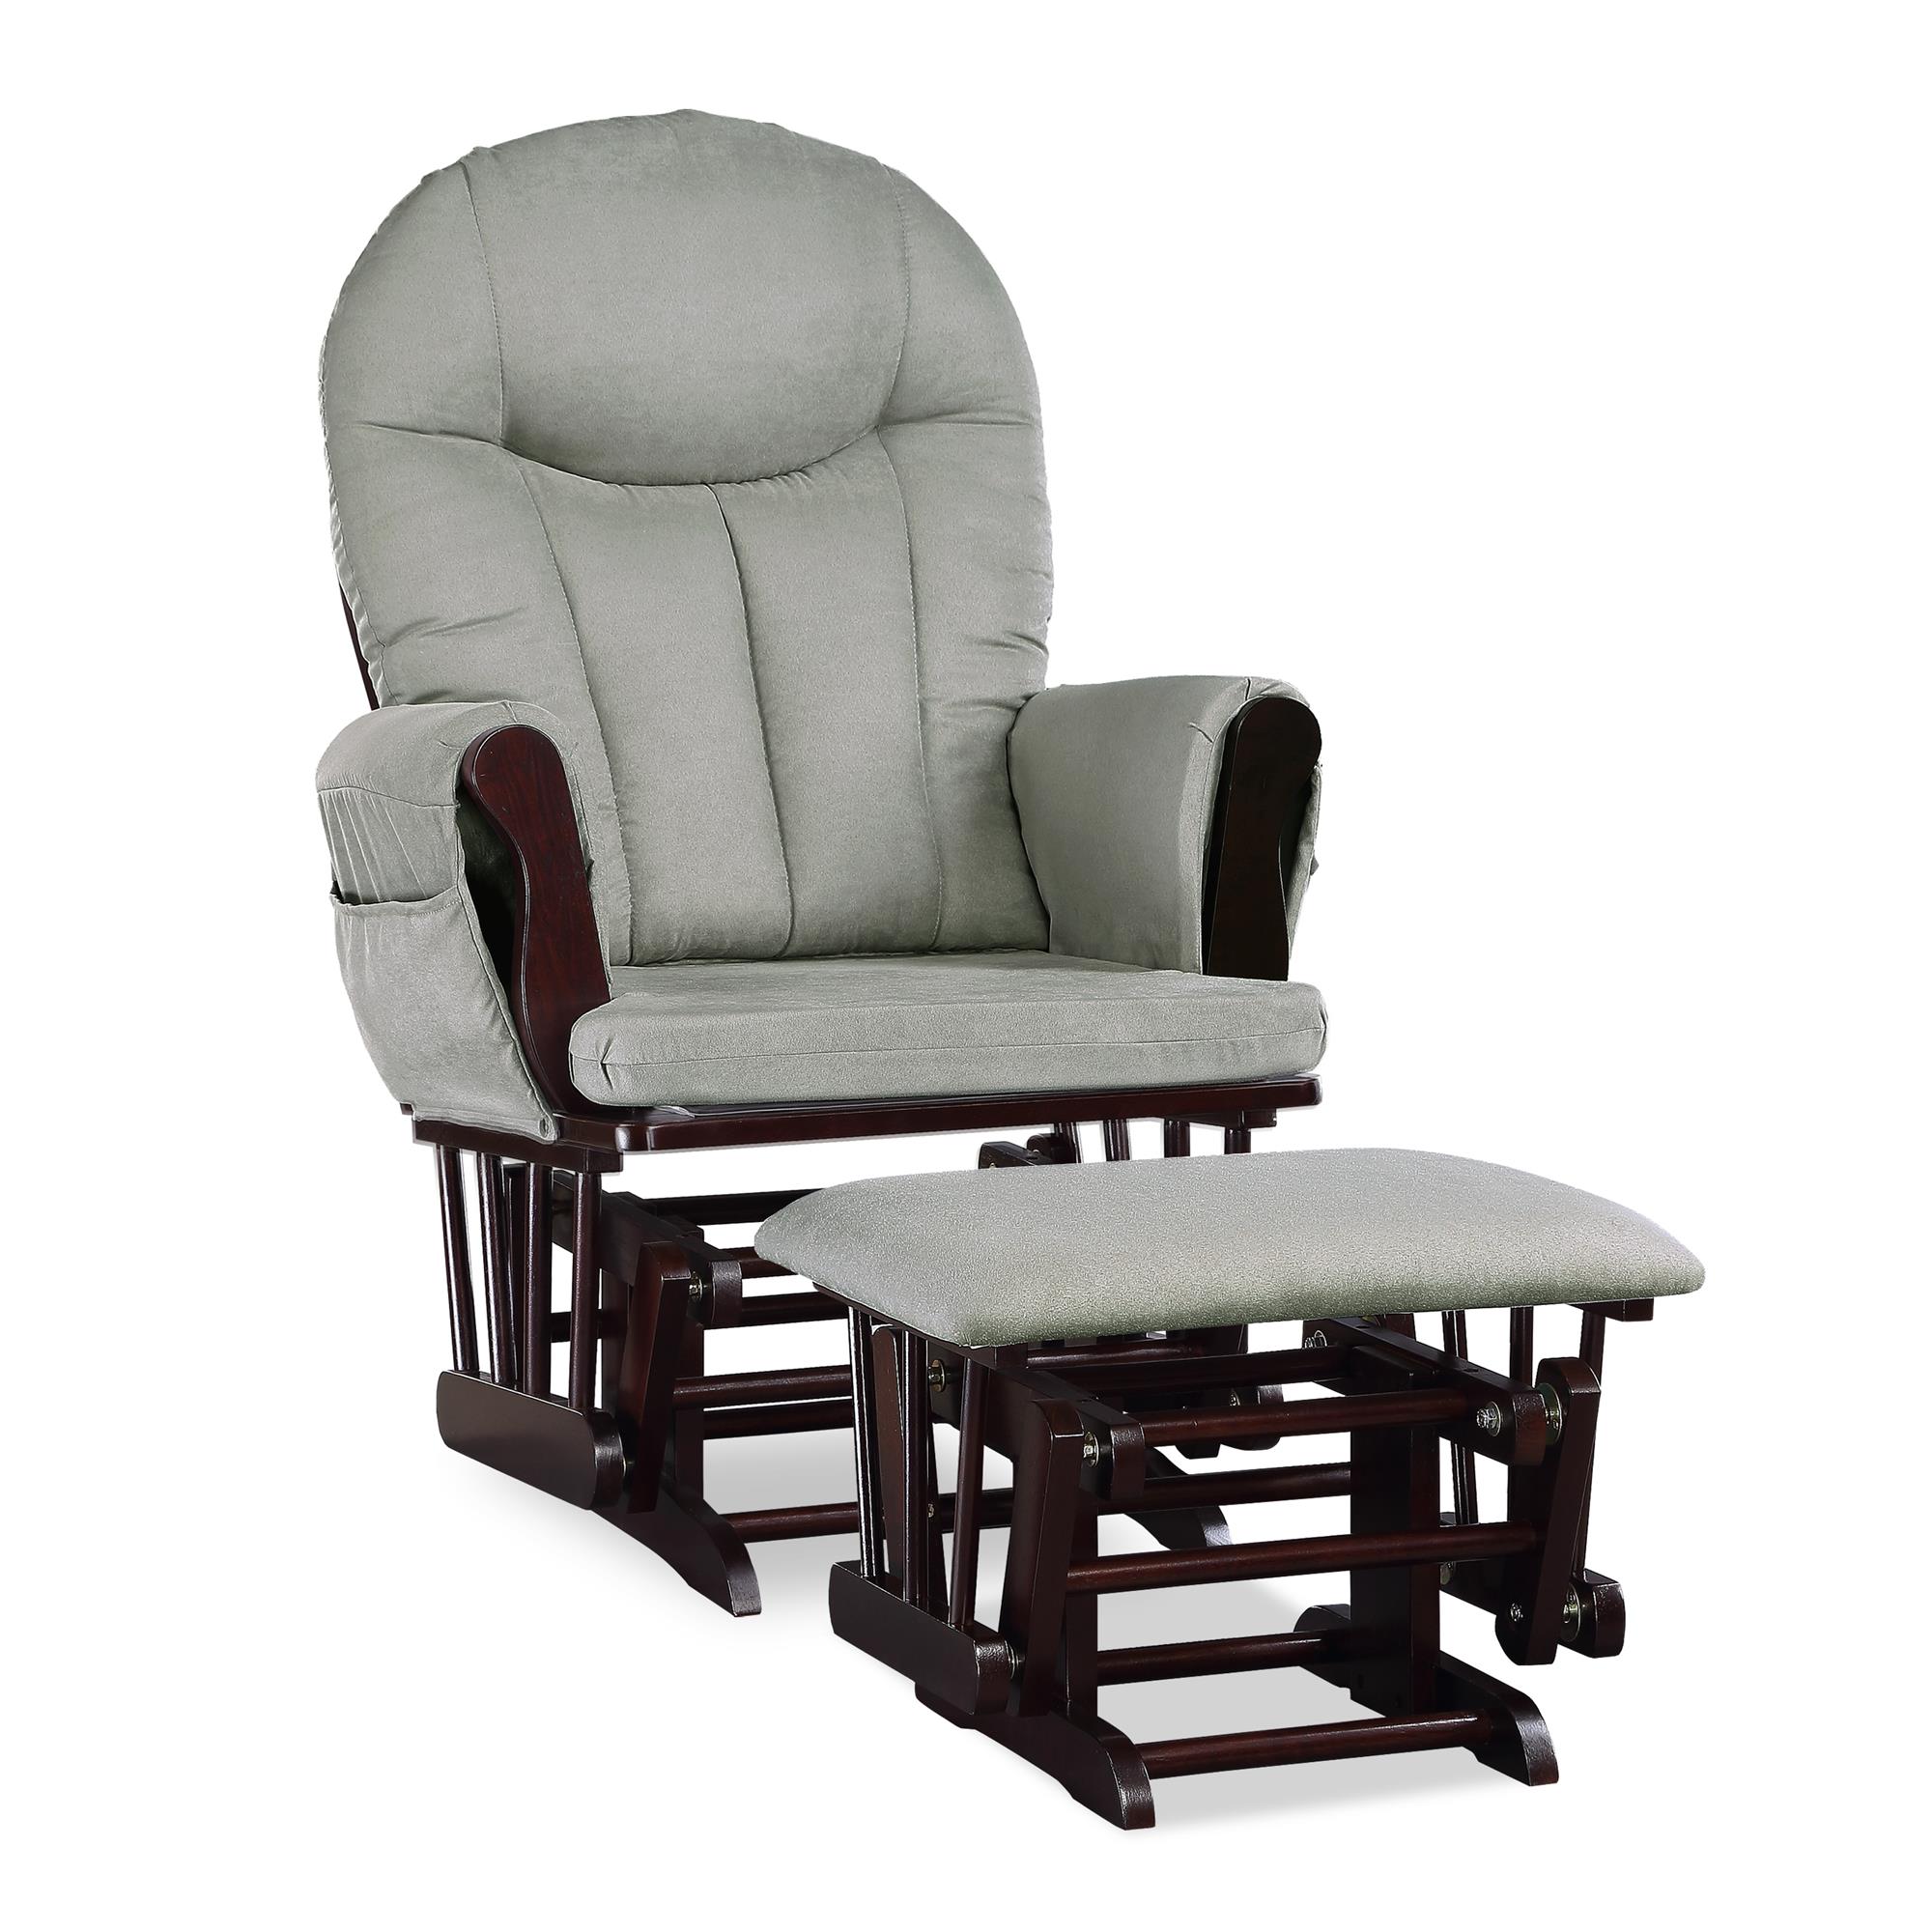 Baby Relax Huntington Glider Rocker and Ottoman, Gray and Espresso - image 4 of 13